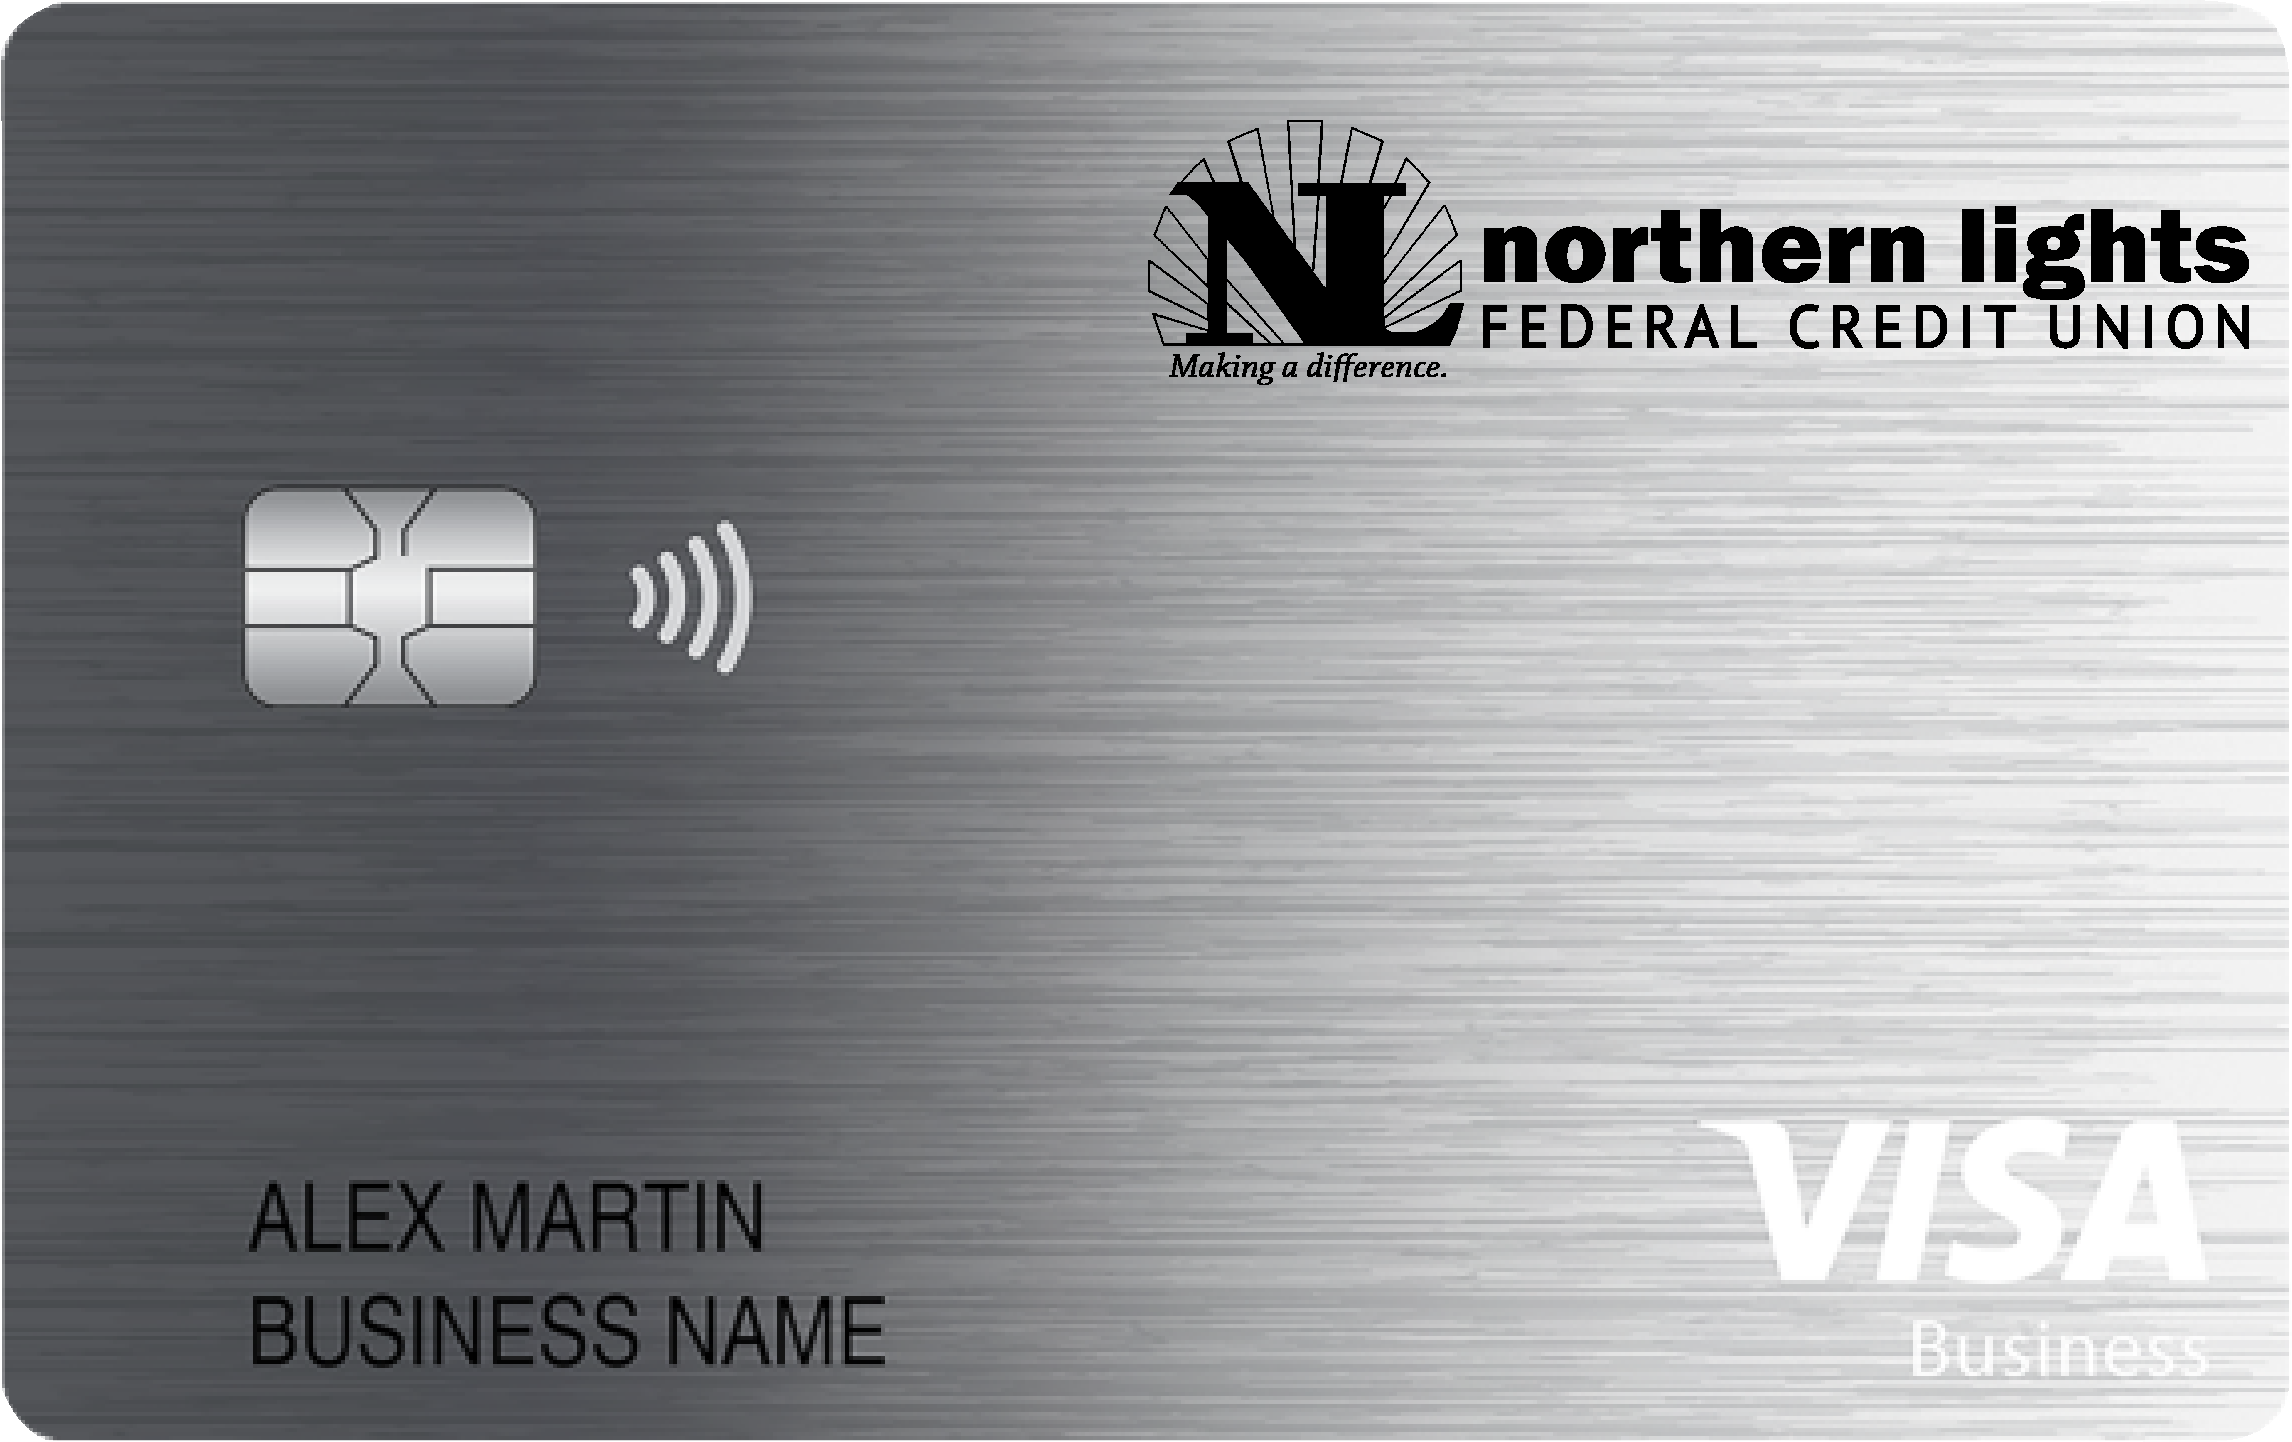 Northern Lights Federal Credit Union Business Real Rewards Card